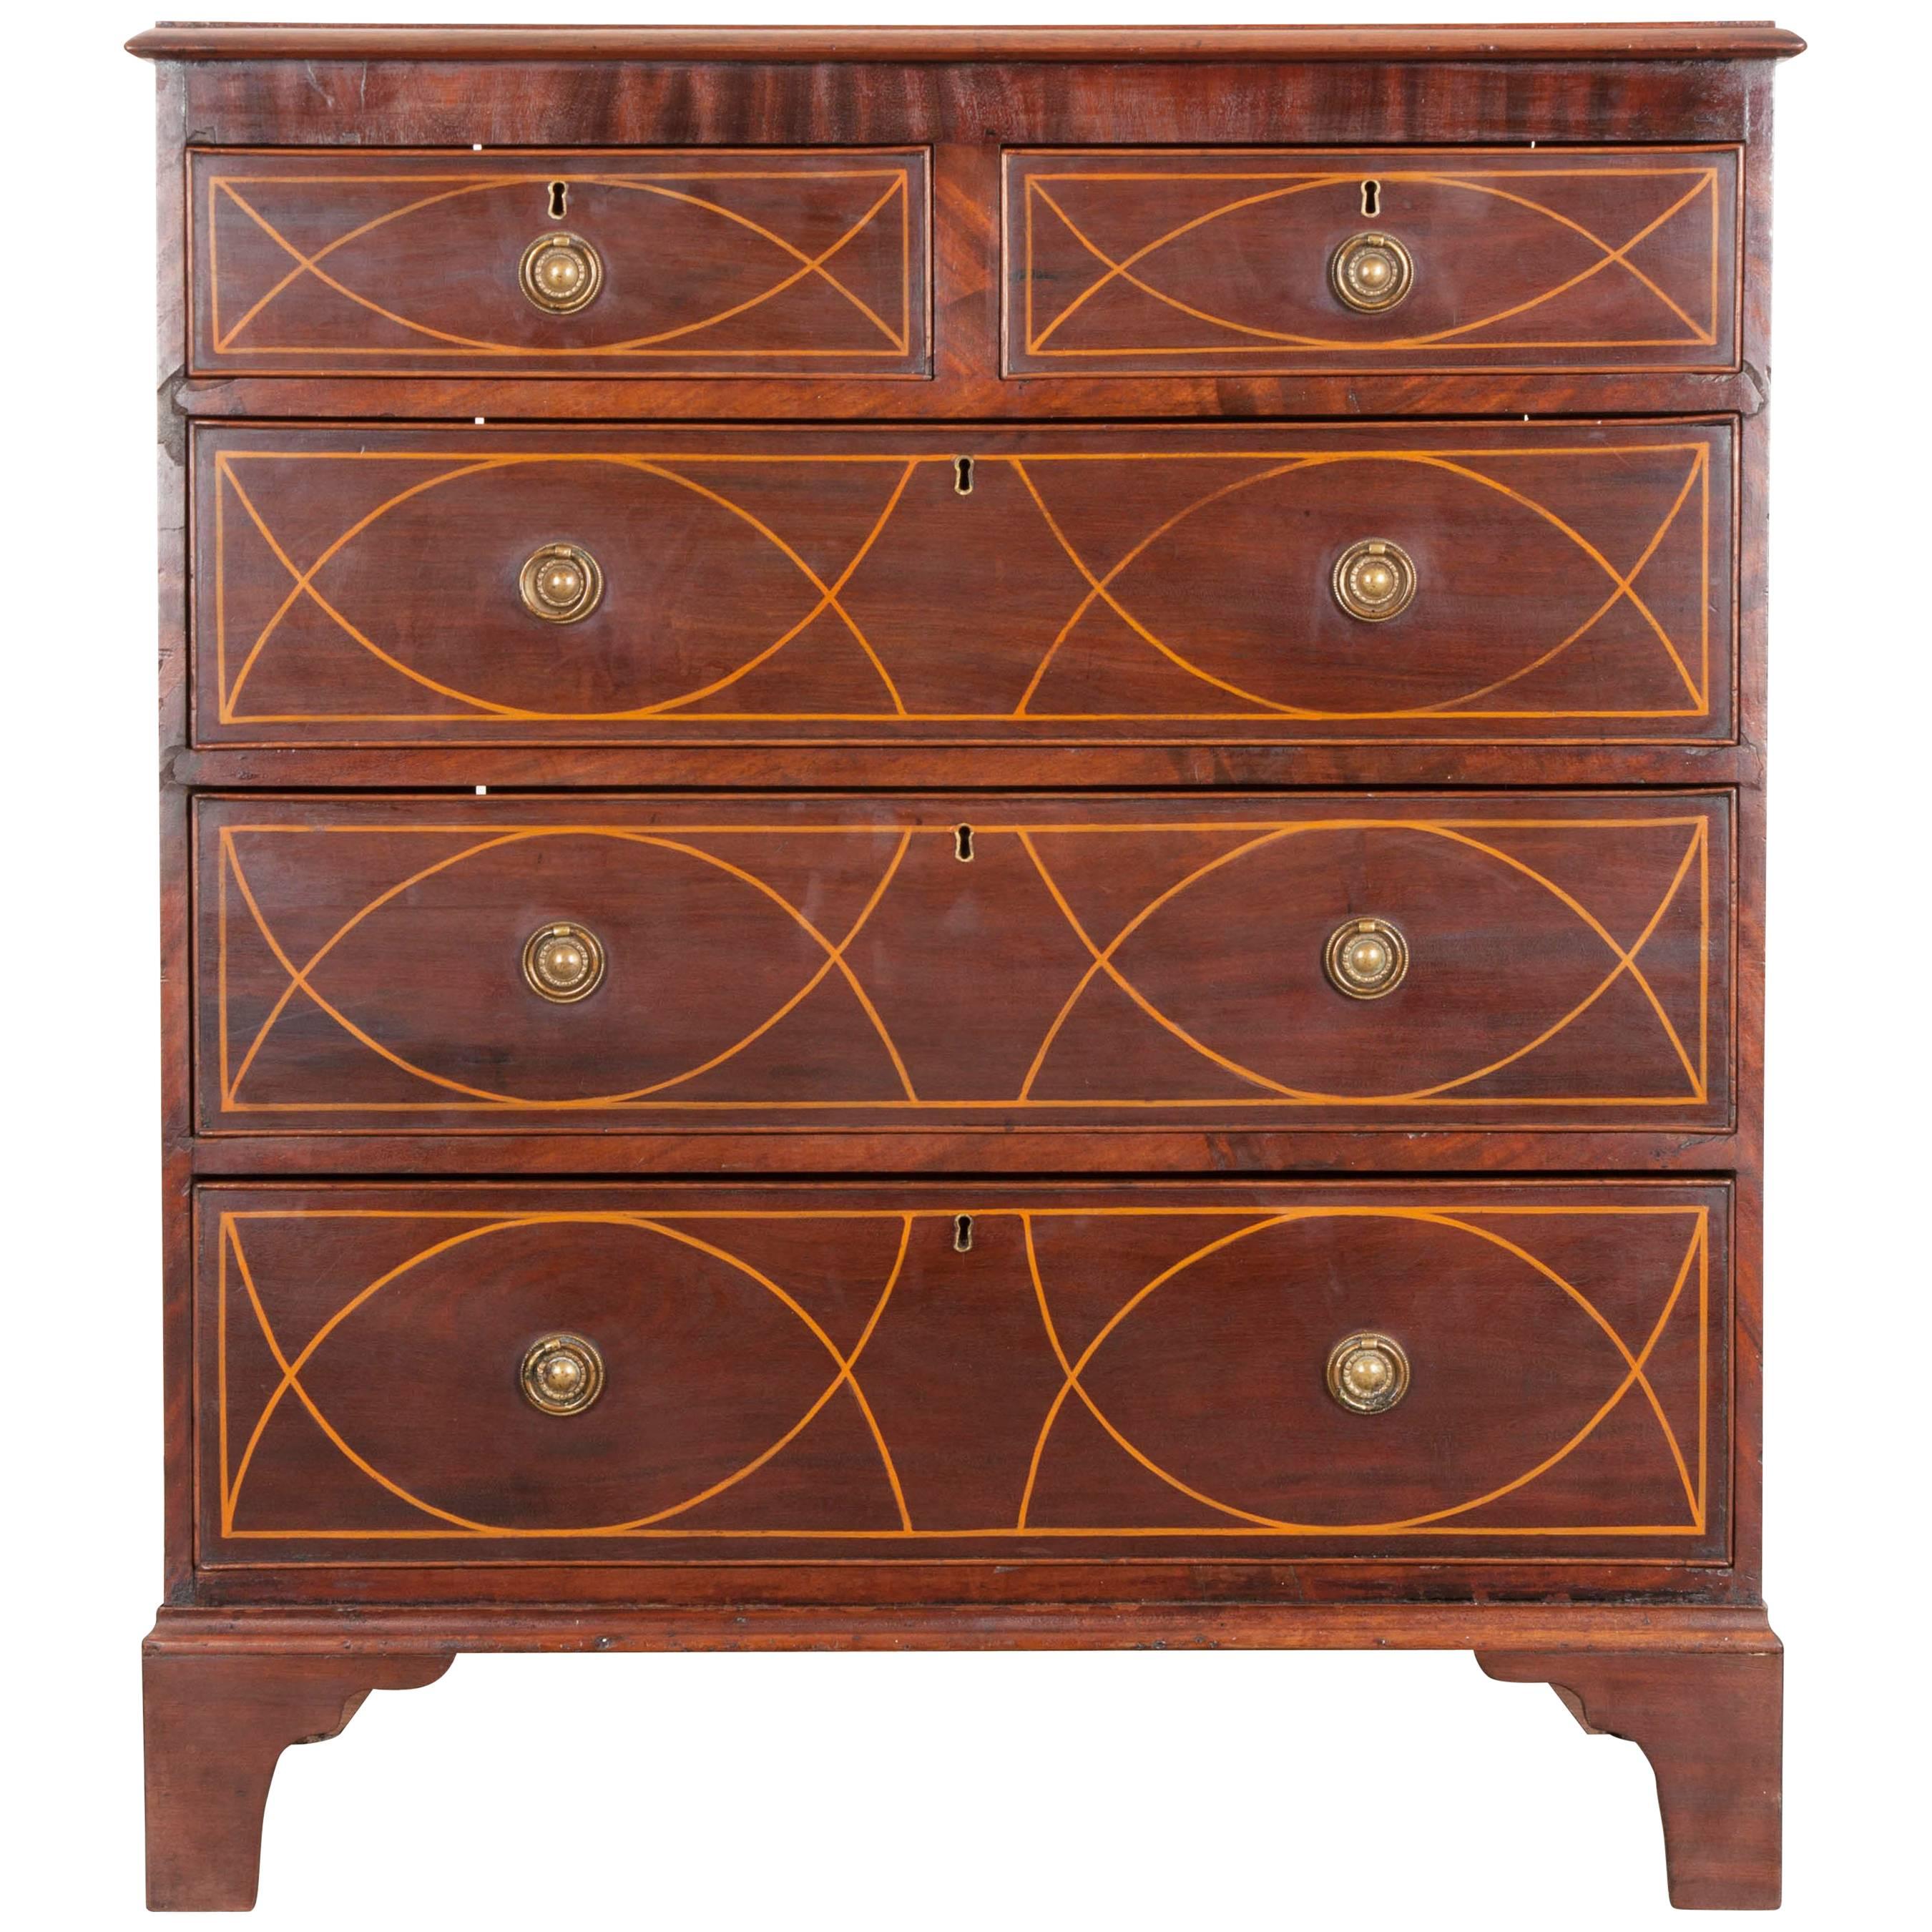 English Early 19th Century Mahogany Chest of Drawers